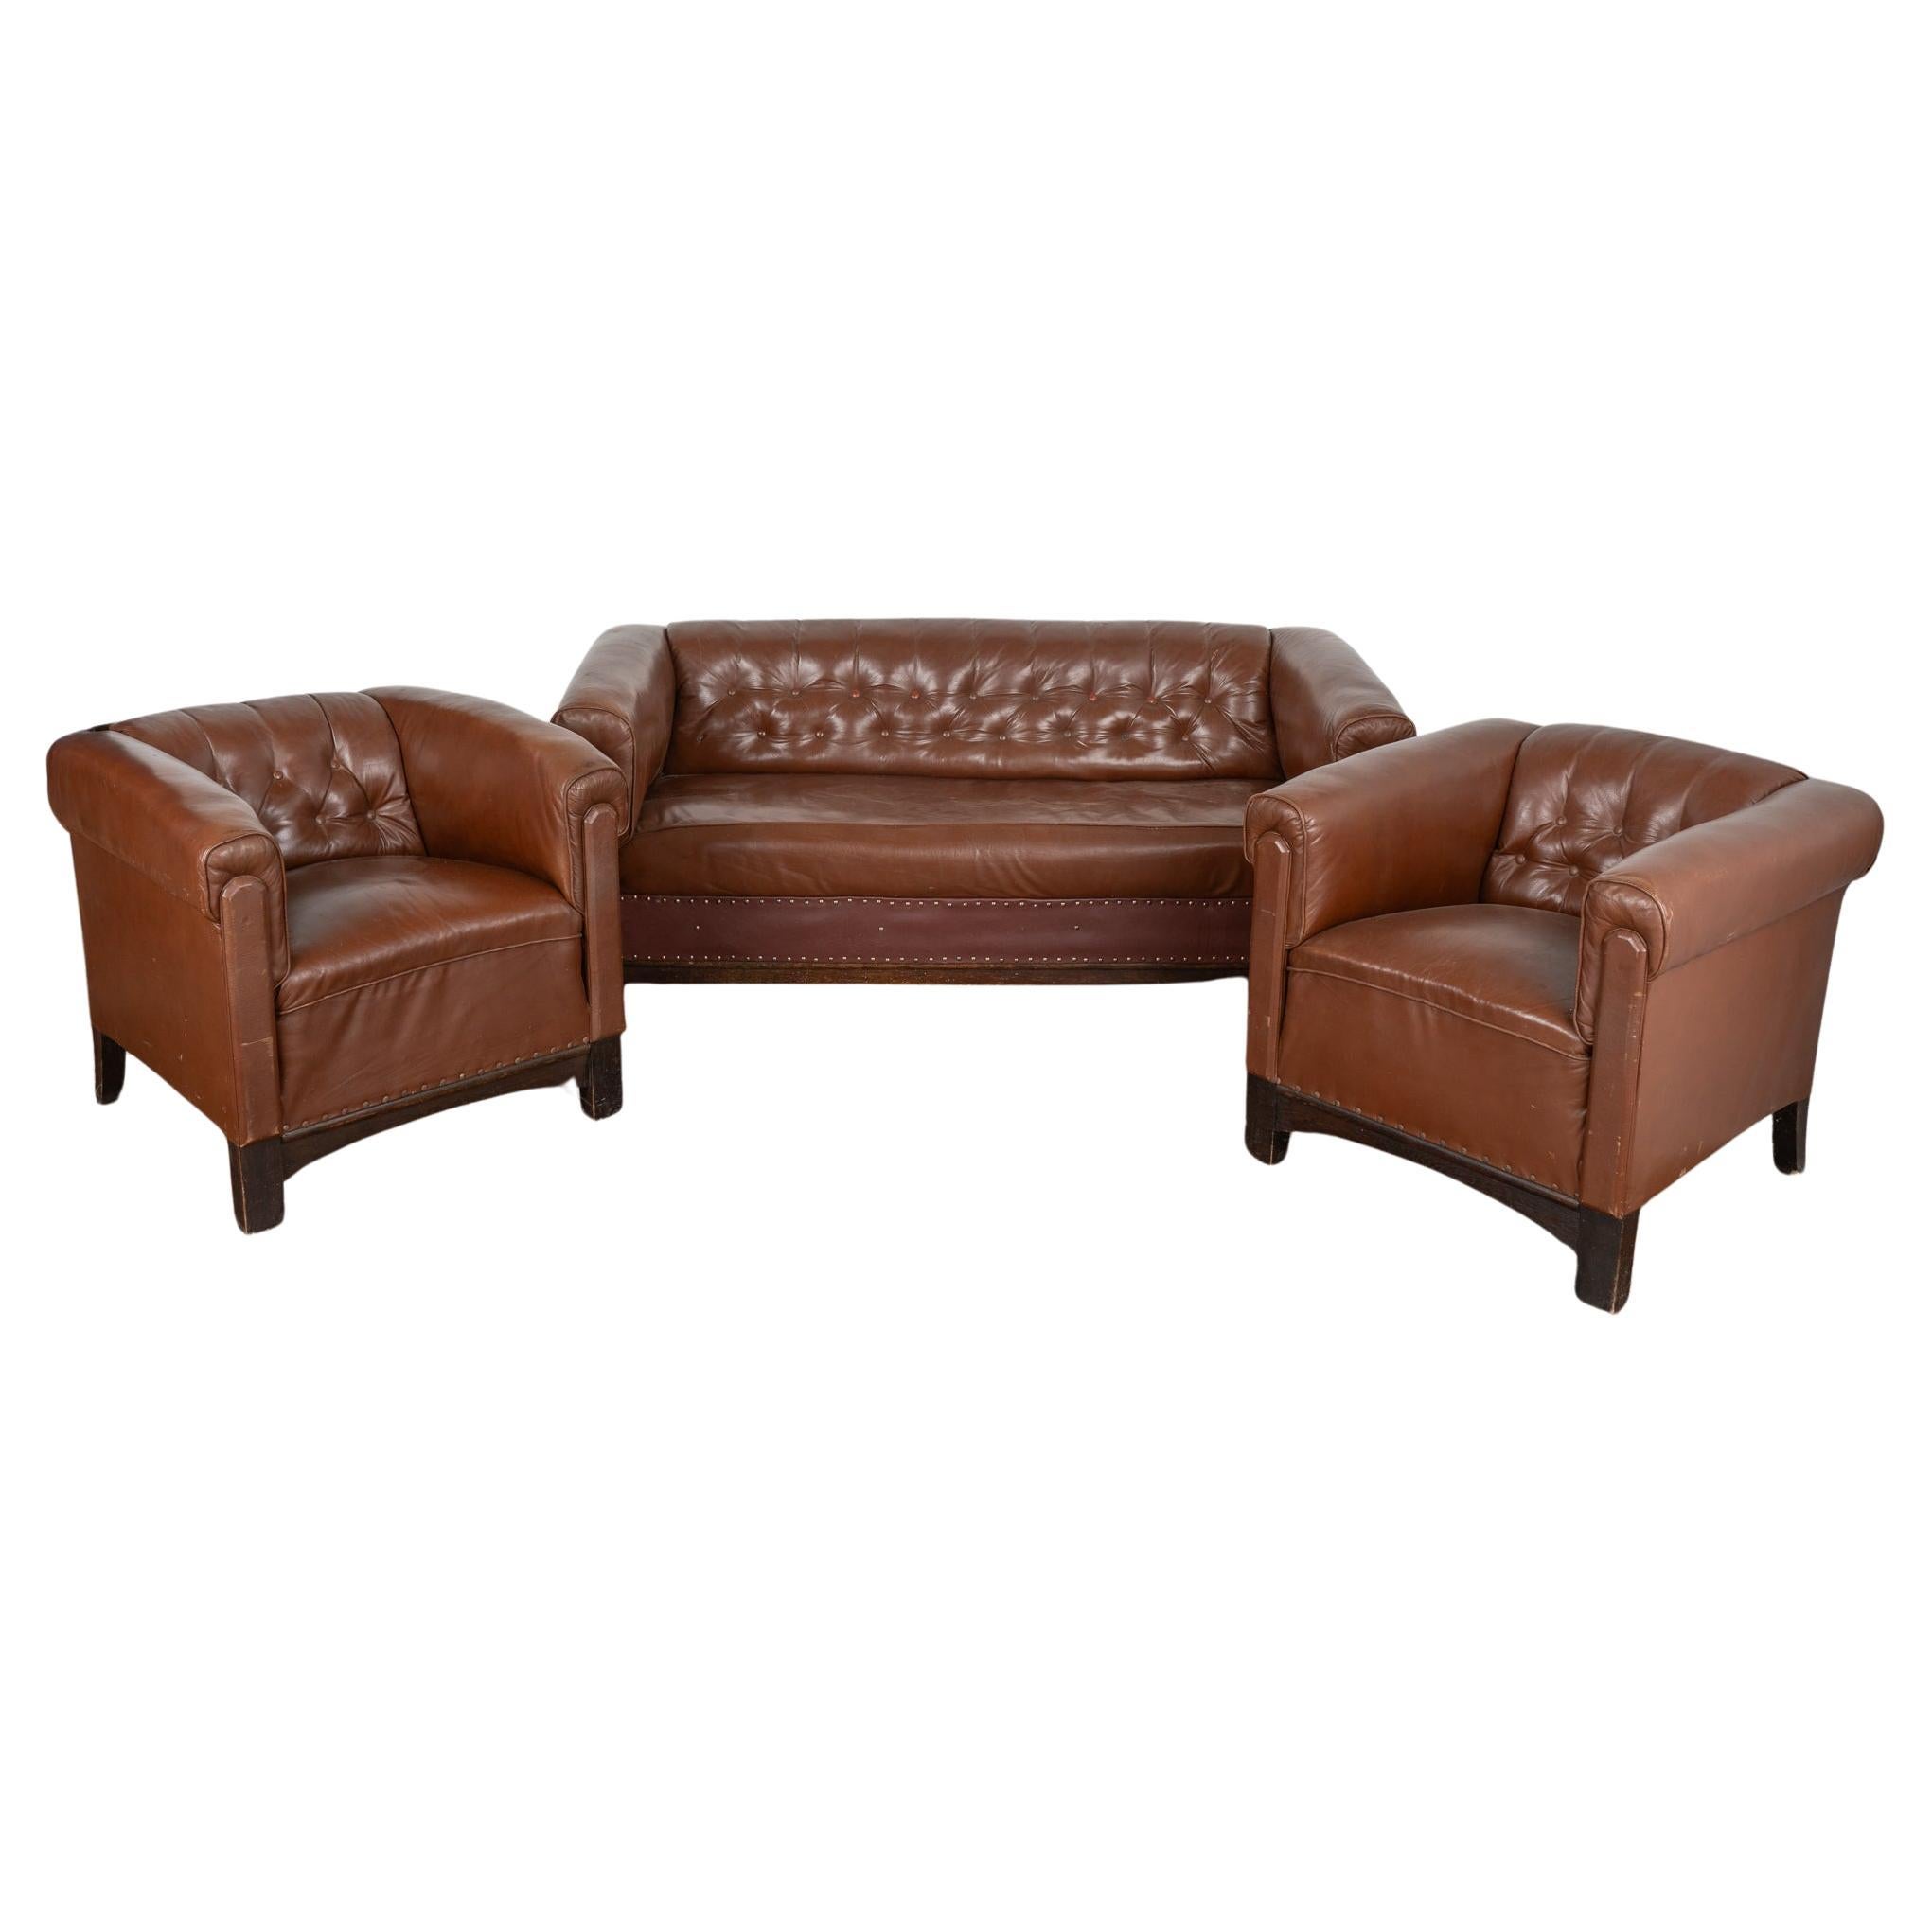 Set of 3, Vintage Brown Leather Sofa and Pair of Club Chairs, Denmark circa 1960 For Sale